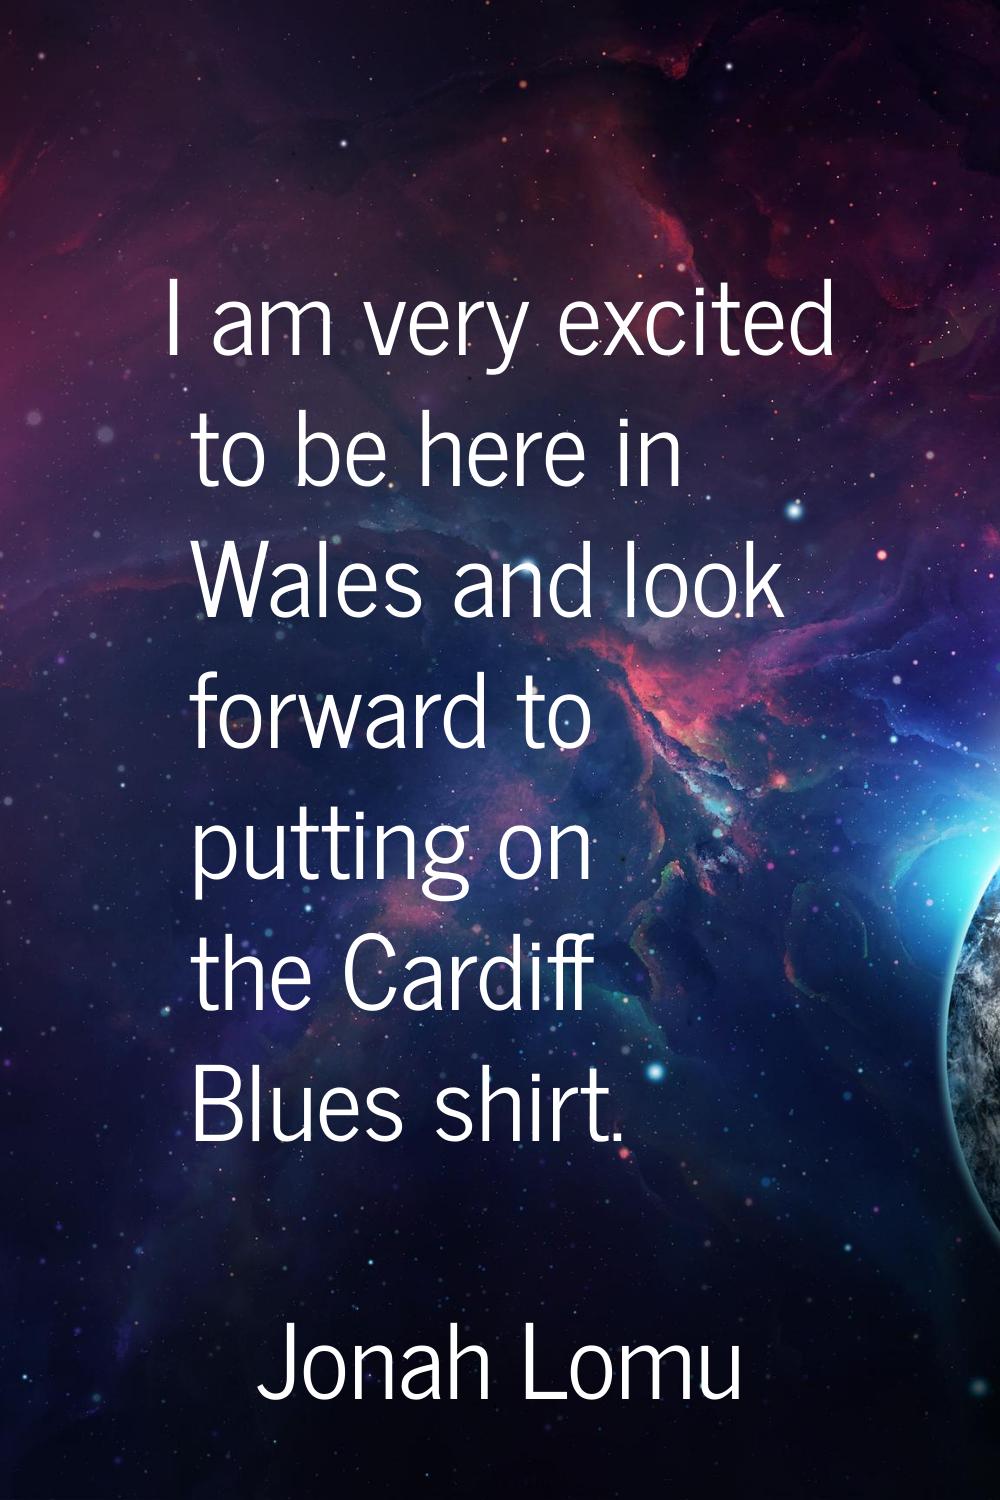 I am very excited to be here in Wales and look forward to putting on the Cardiff Blues shirt.